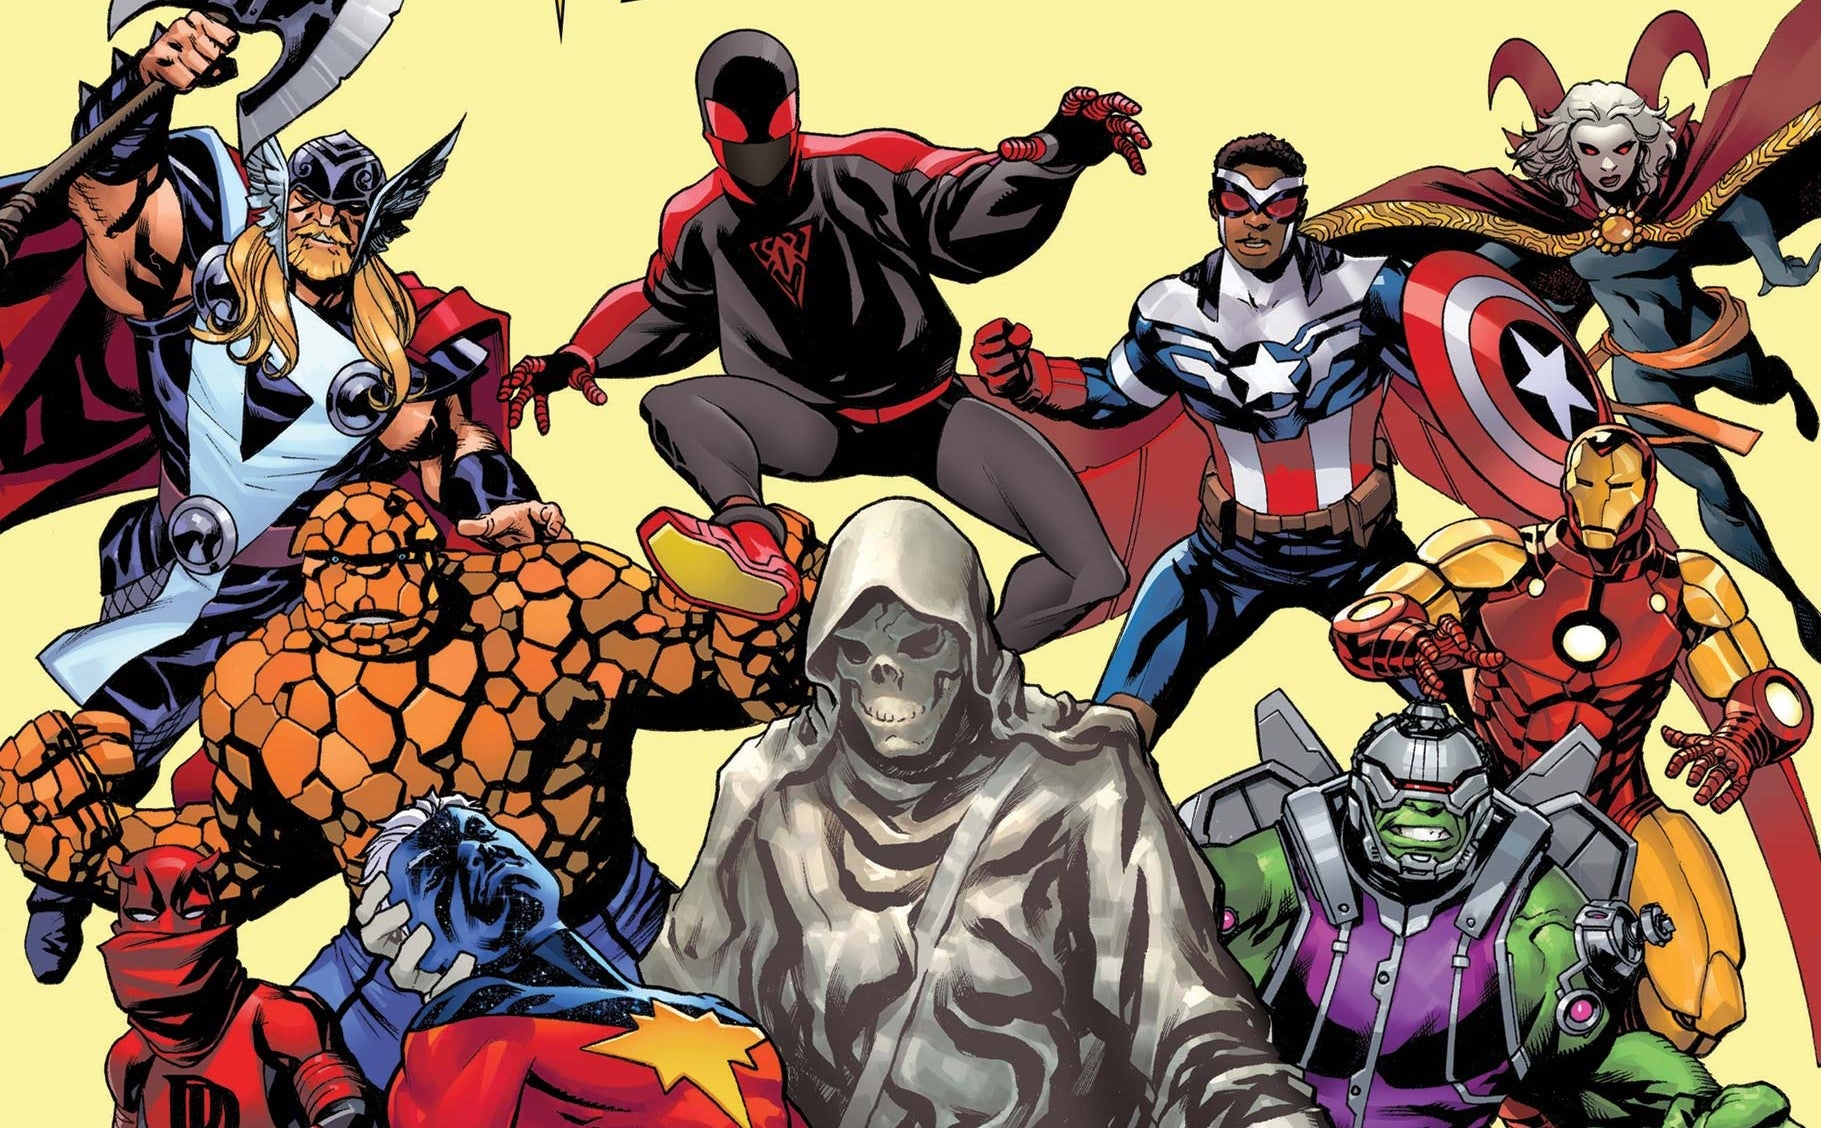 Cover of Genis Vell issue 5 featuring a cast of characters including Captain America, Daredevil, and The Thing